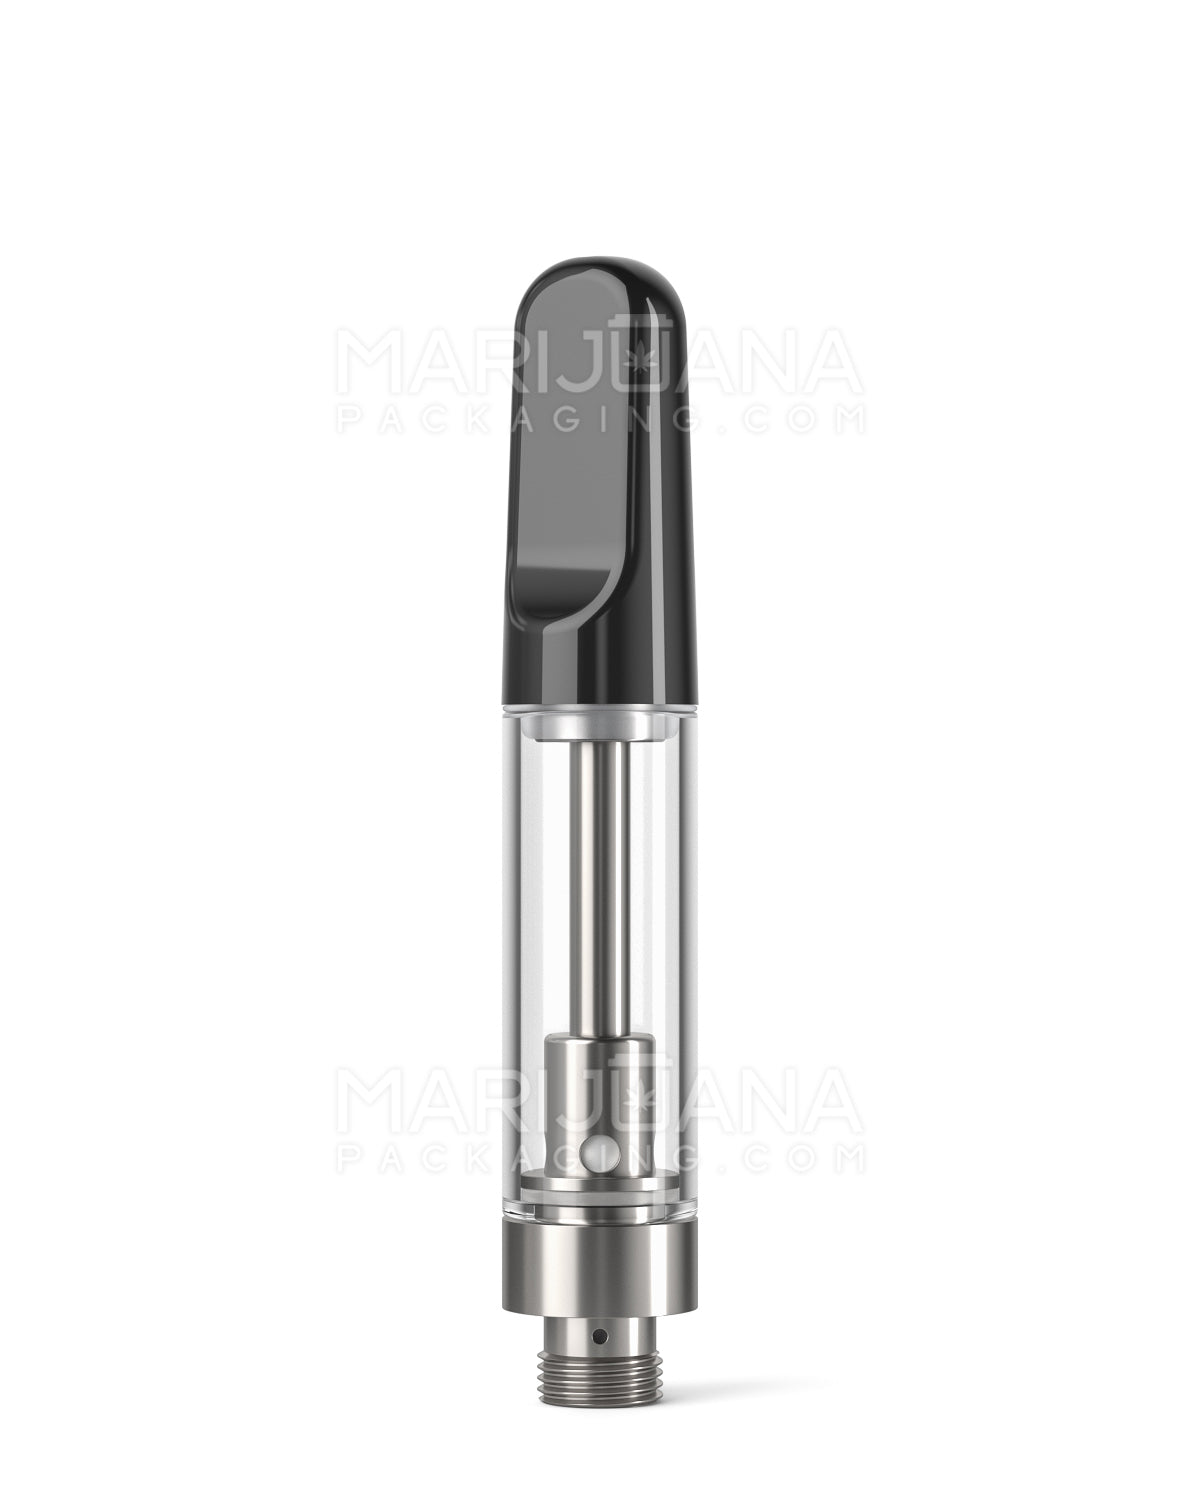 CCELL | Liquid6 Reactor Glass Vape Cartridge with Black Ceramic Mouthpiece | 1mL - Screw On - 100 Count - 1